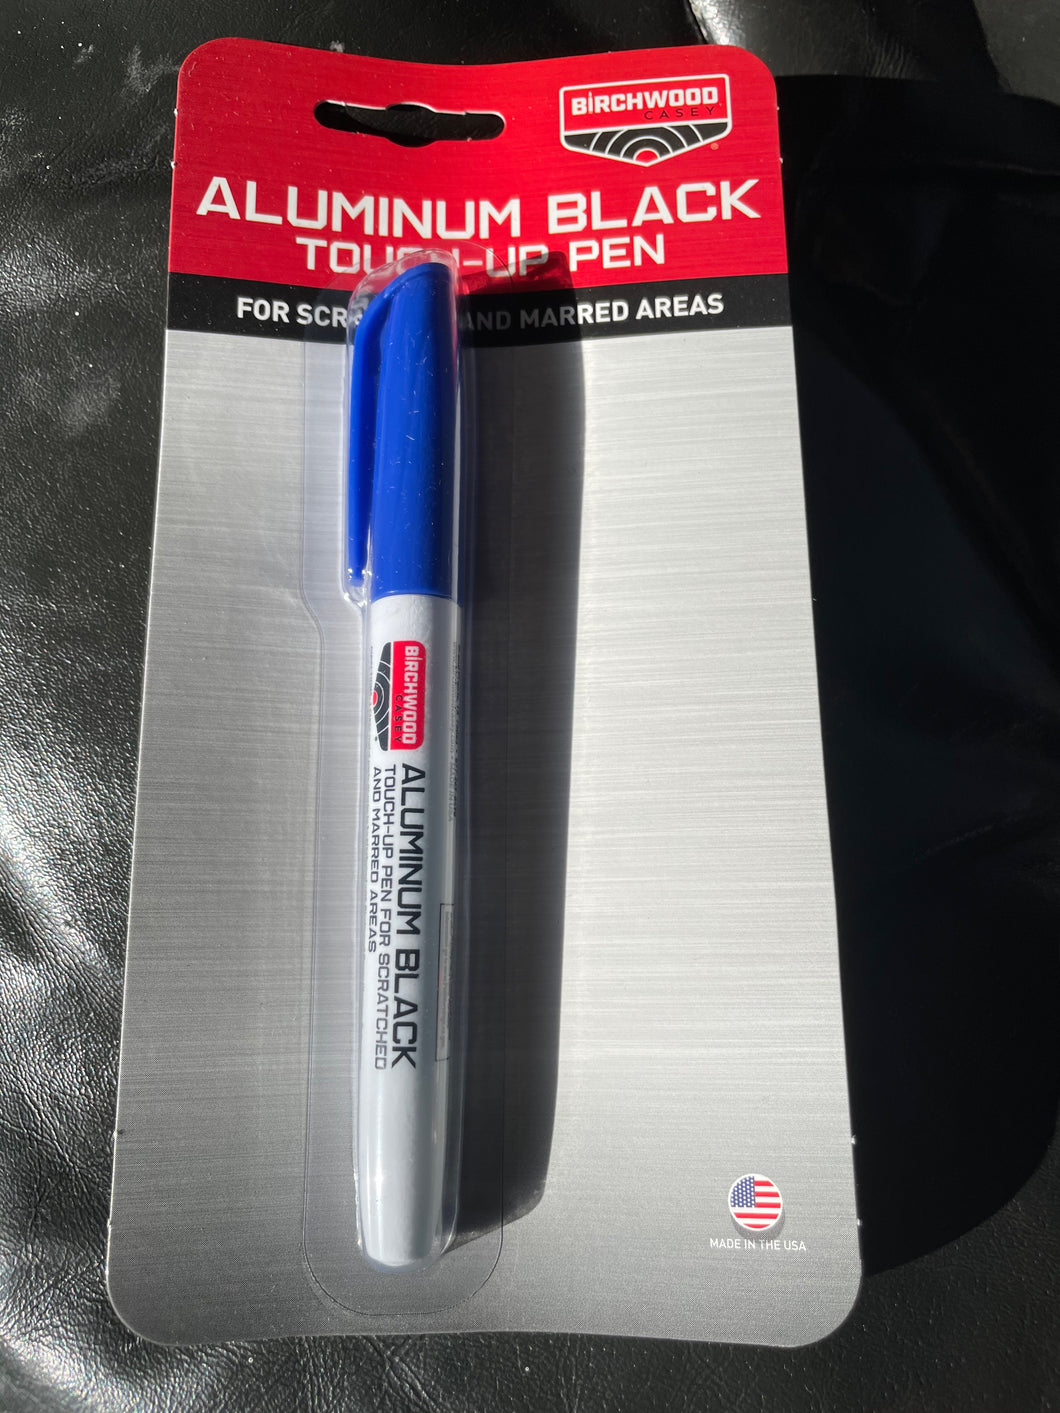 Aluminum Black Metal Finish (Aluma Black PAB17) with Touch-up Pen for Gun  or Any Painted Metal Project Plus 5 Free Cotton Swabs